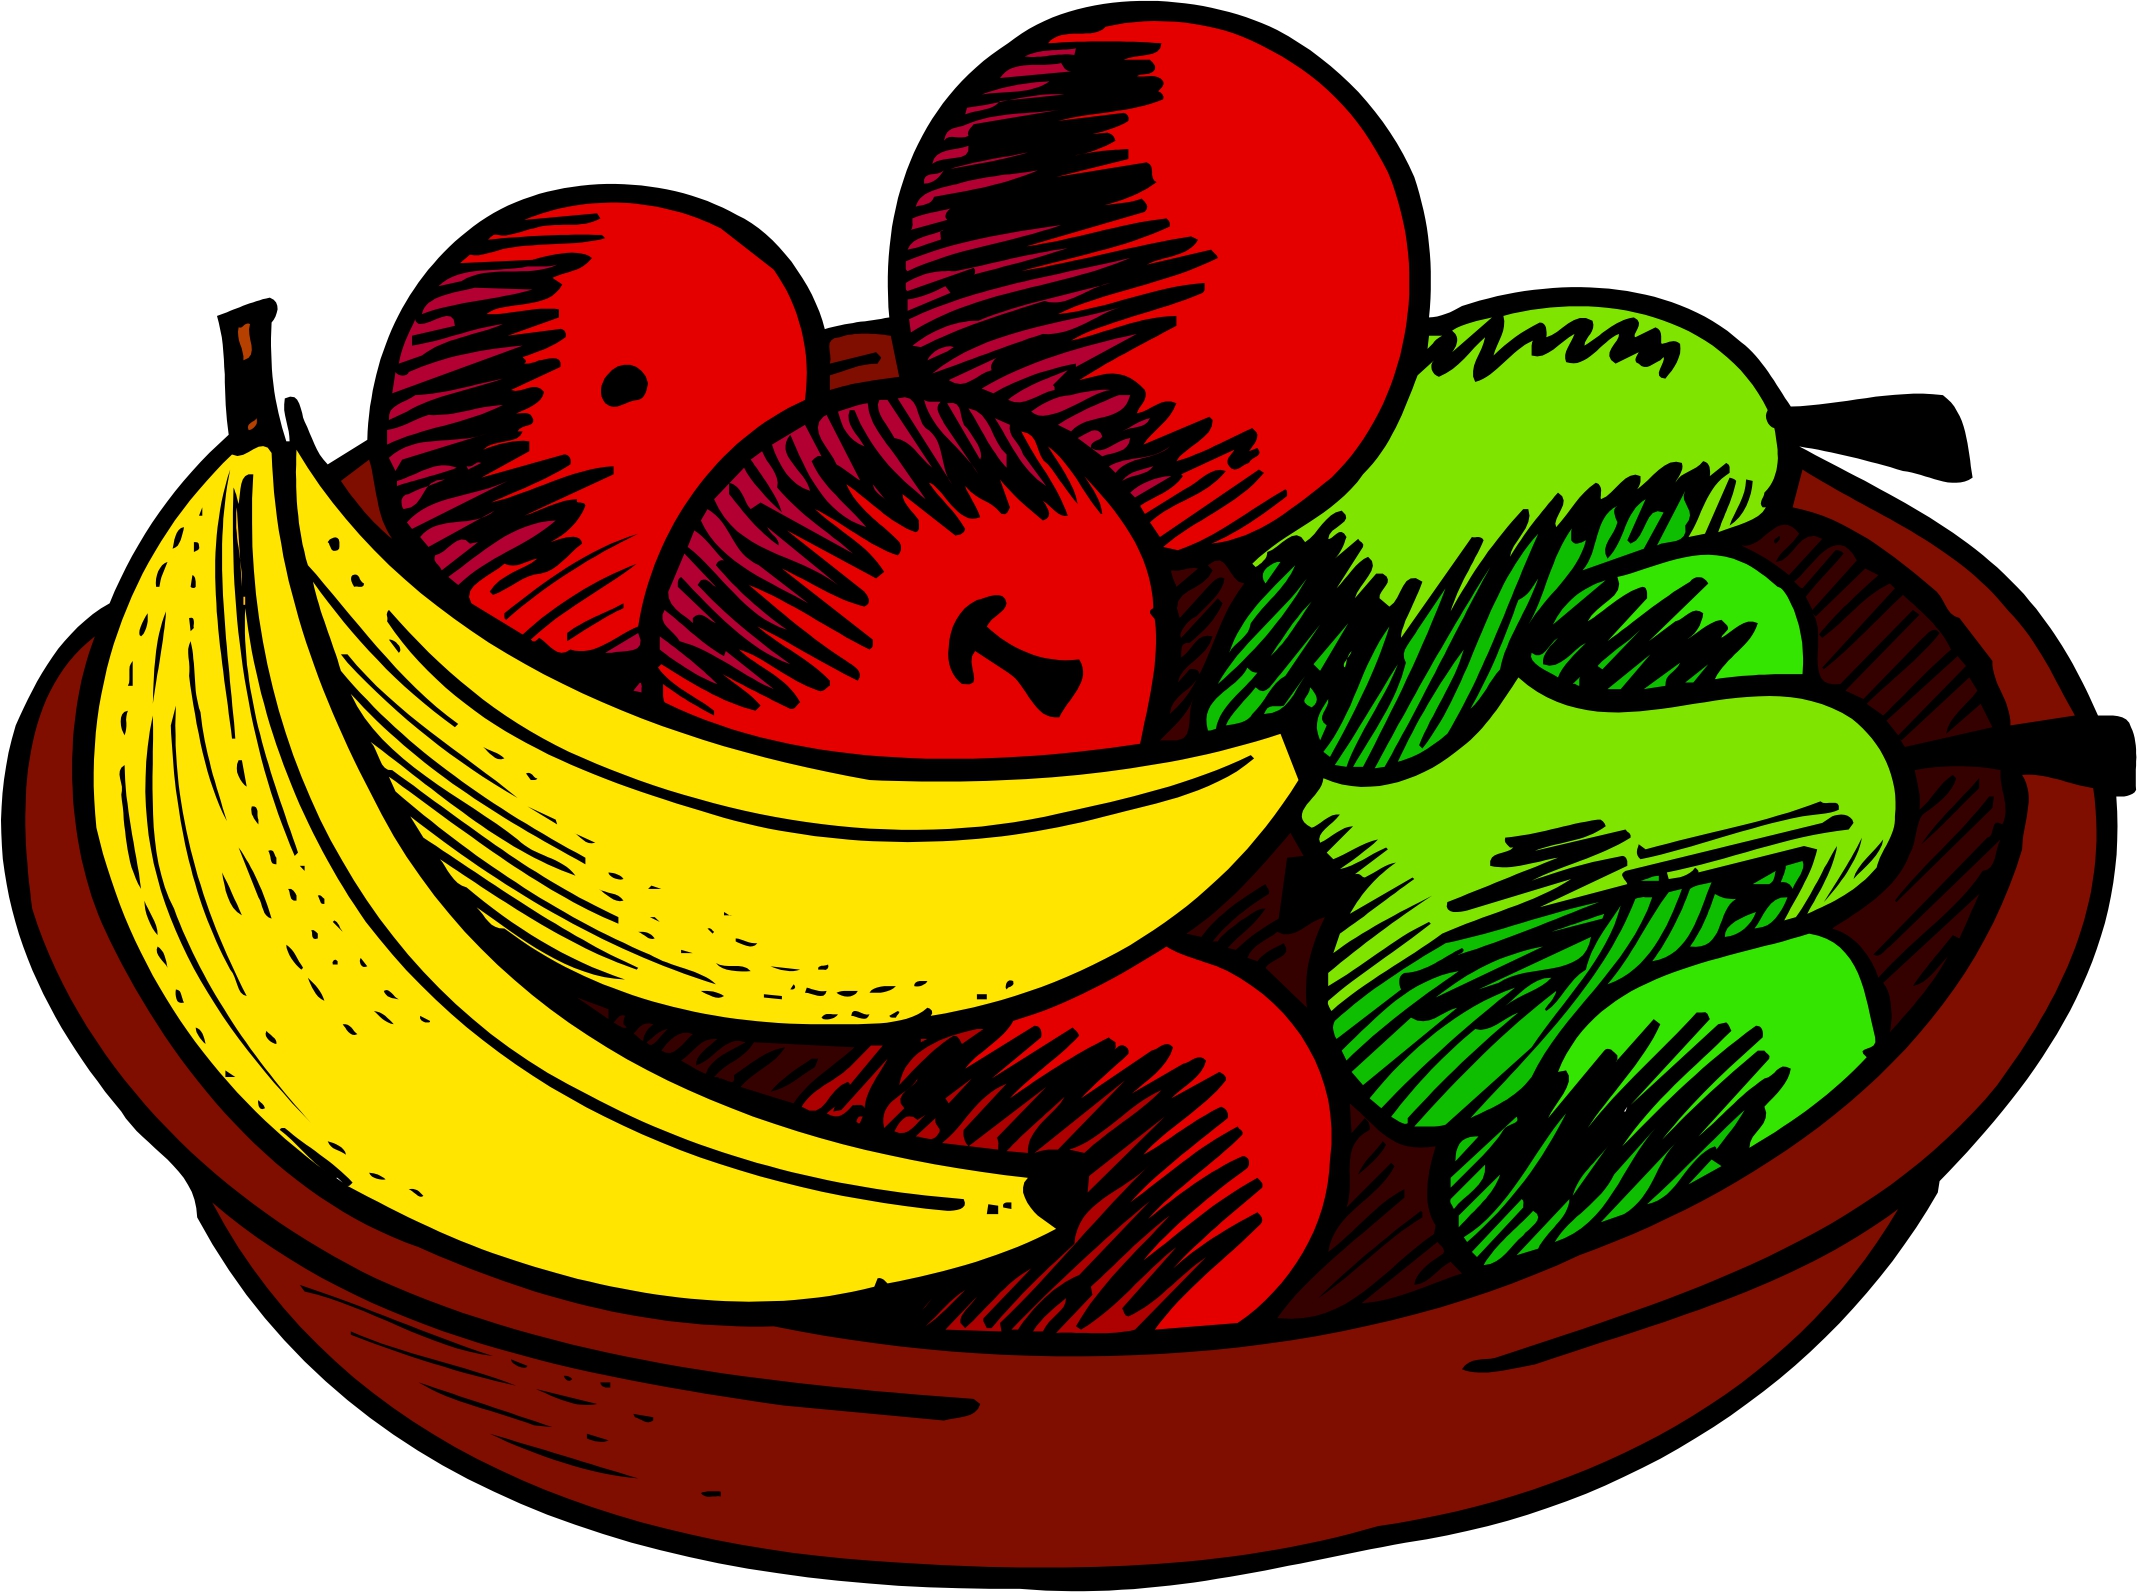 Fruit Bowl Clip Art Images Pictures - Becuo.